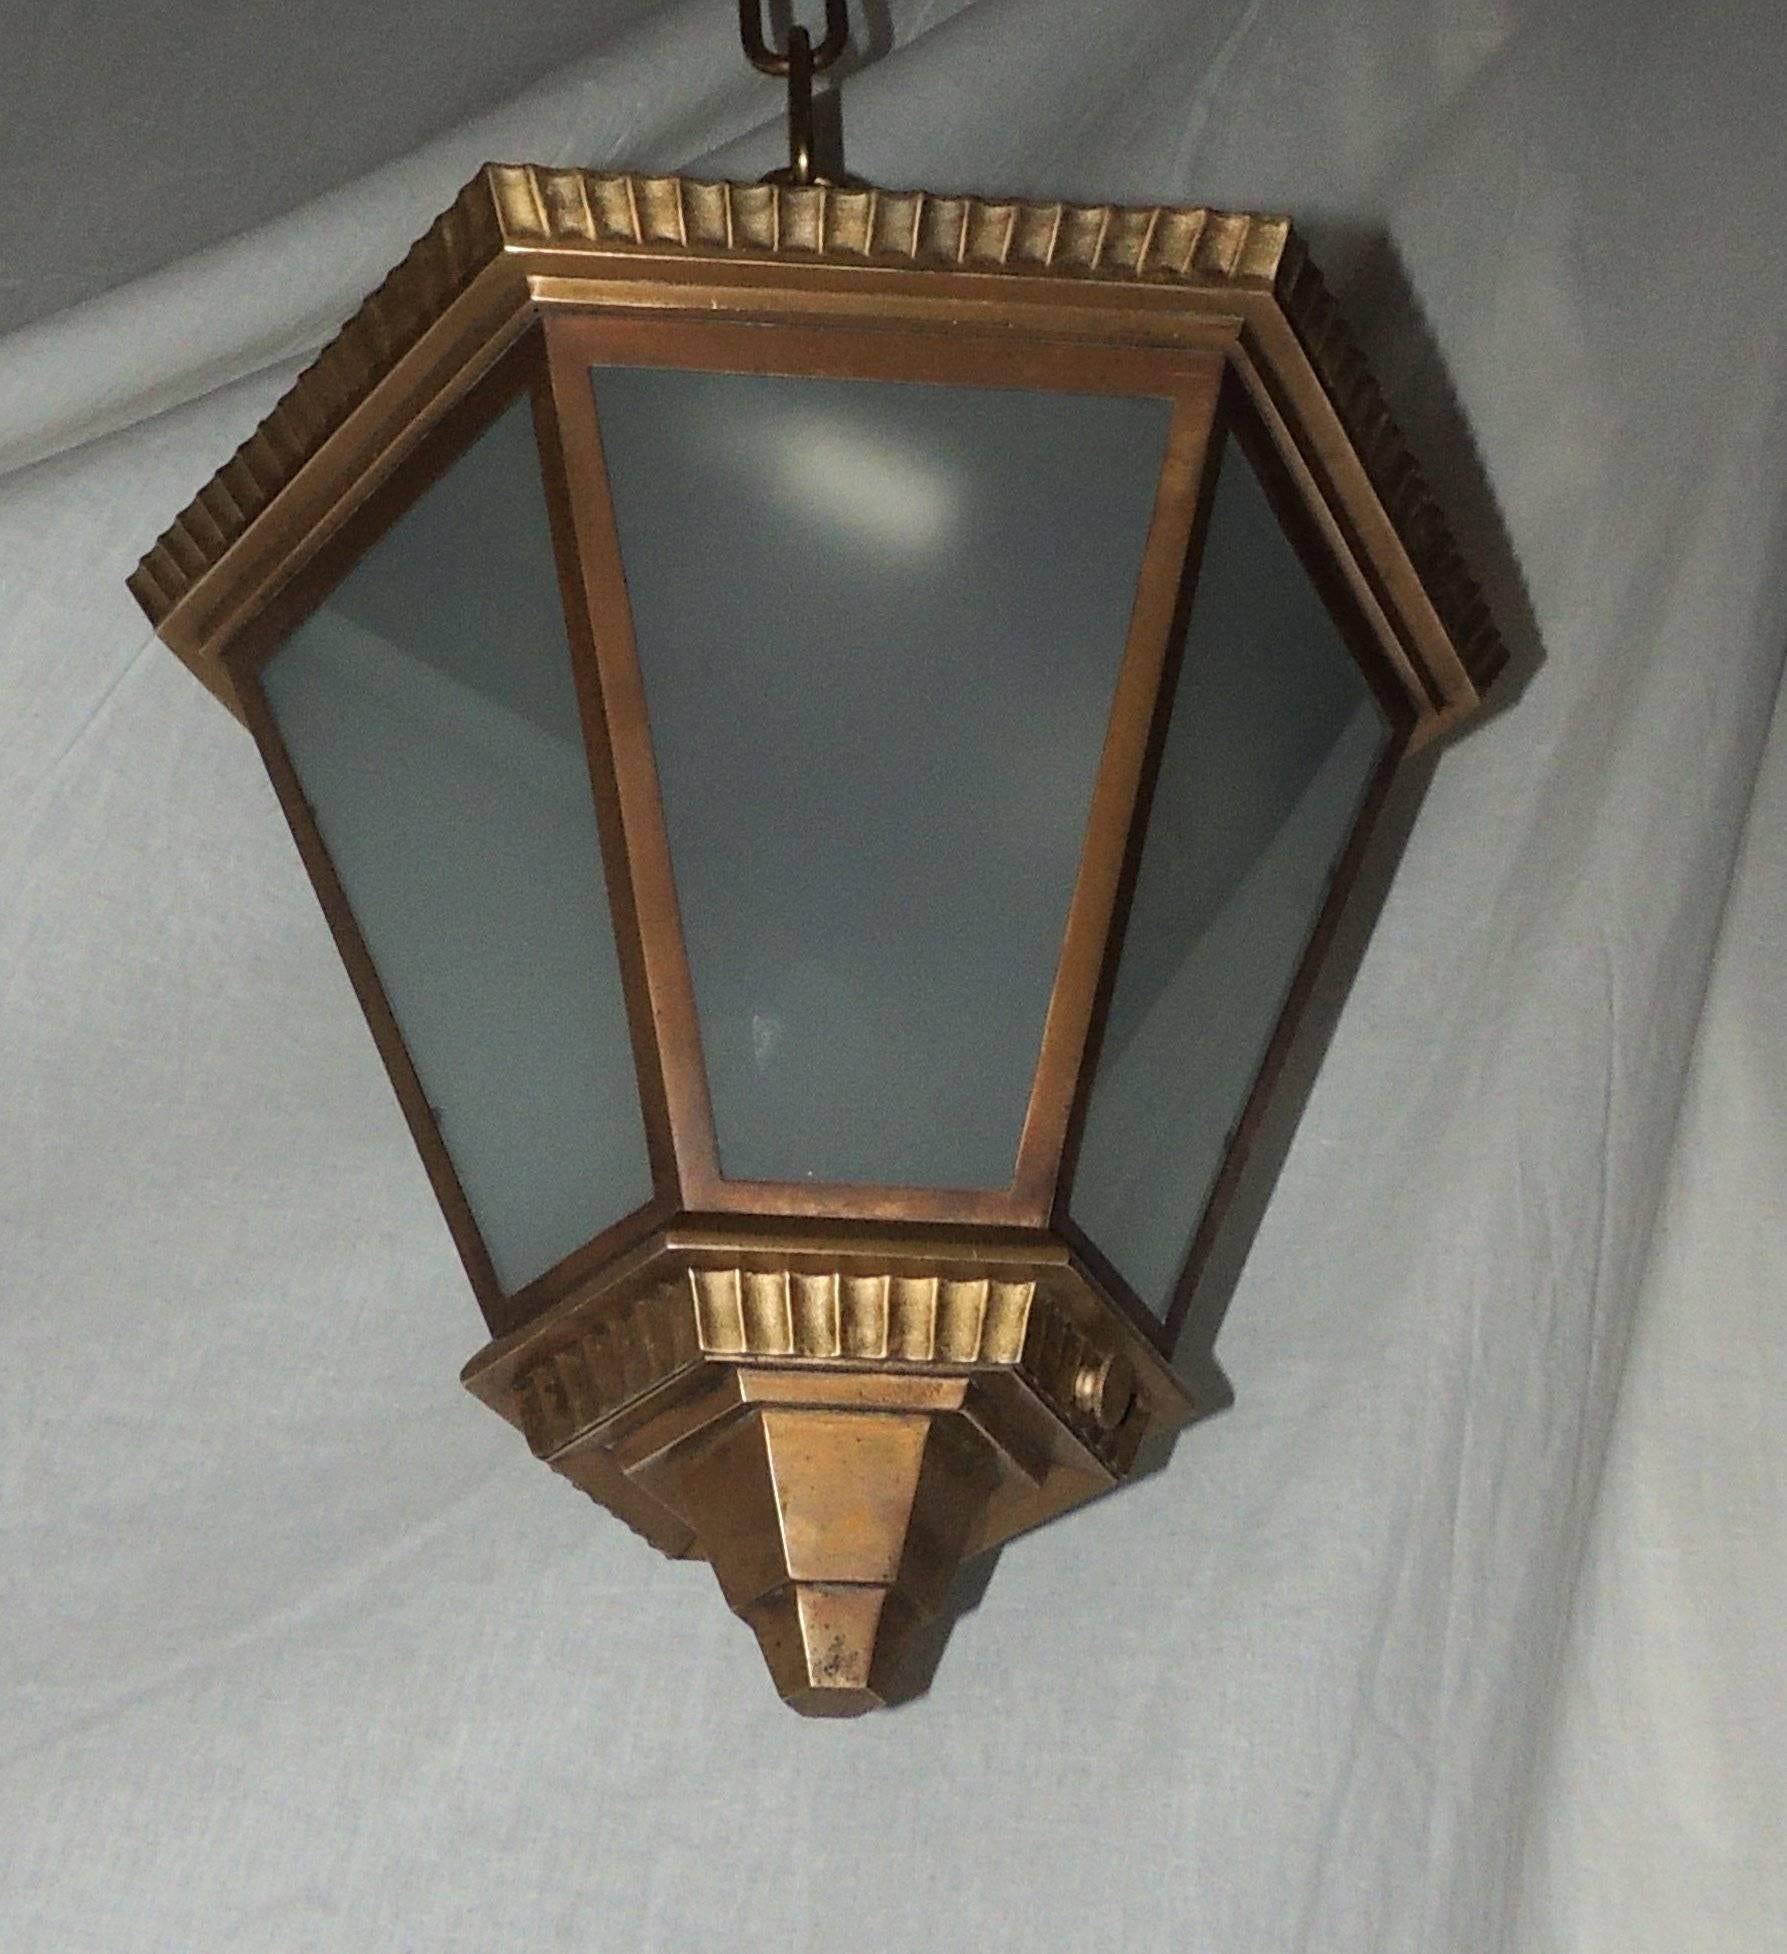 A wonderful Art Deco bronze frosted glass hexagon shaped flush mount pendant fixture with three lights inside.

Measures: 13